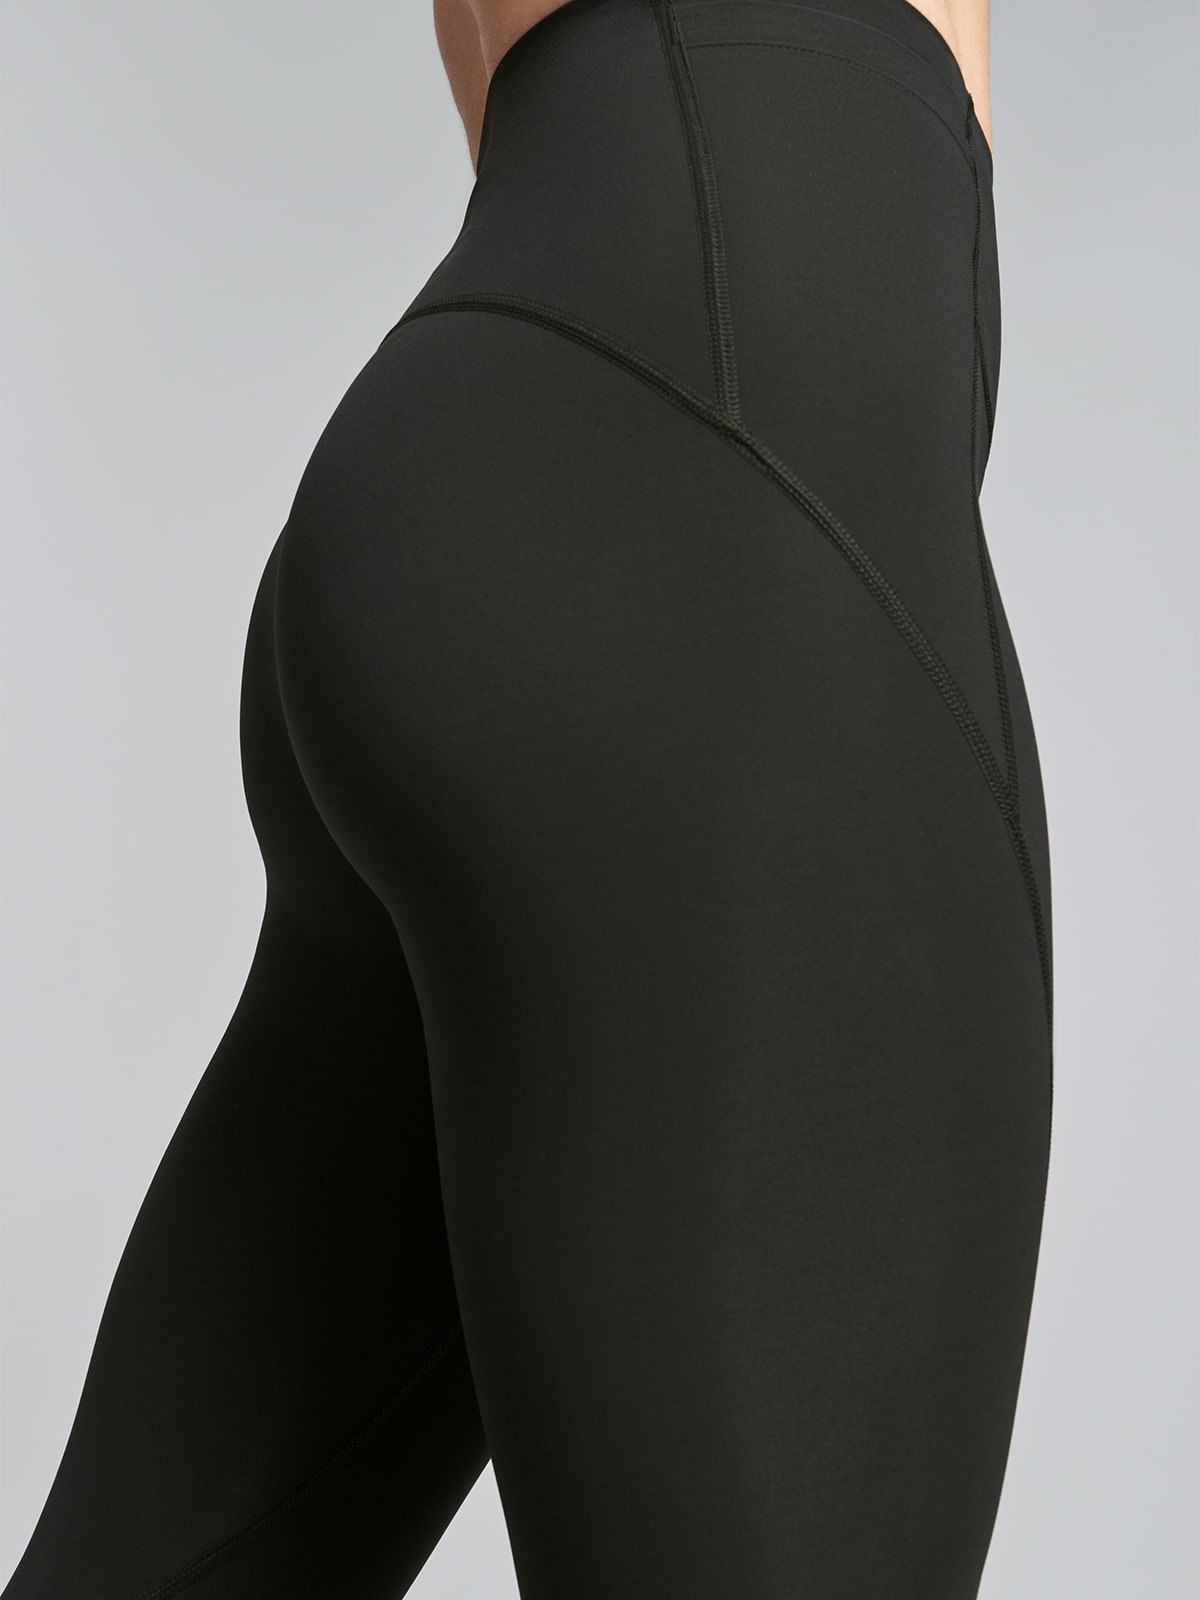 THE OUTER LIMITS 7/8 Legging Olive  Warm workout, Legging, The outer limits